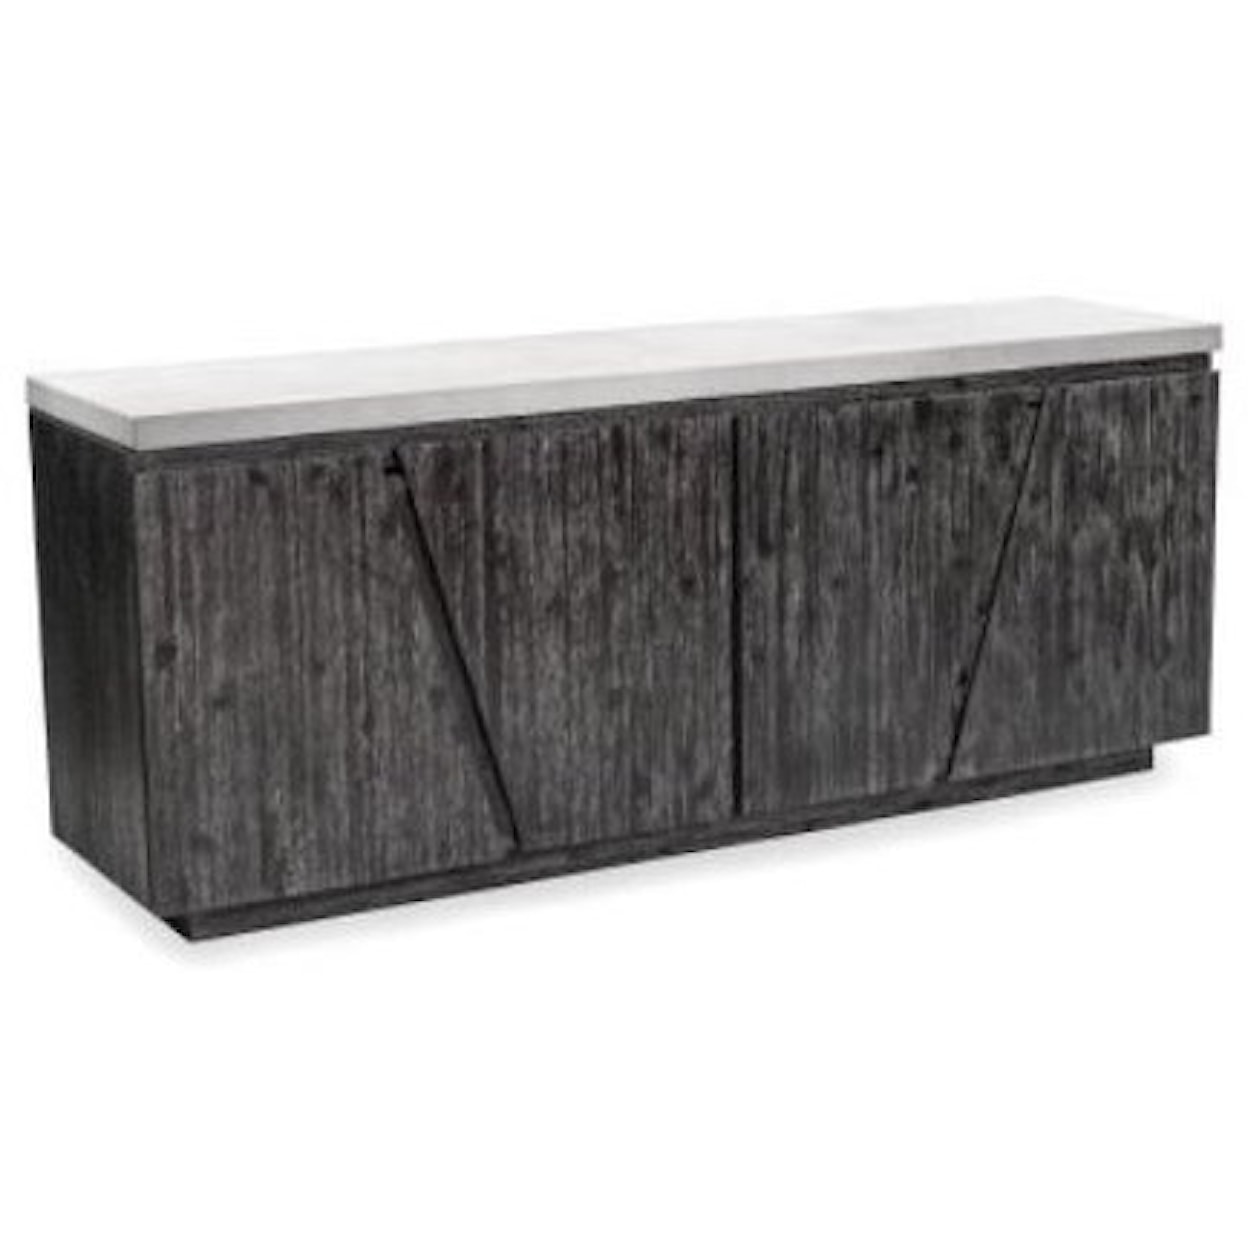 Global Home 13026 Media Console